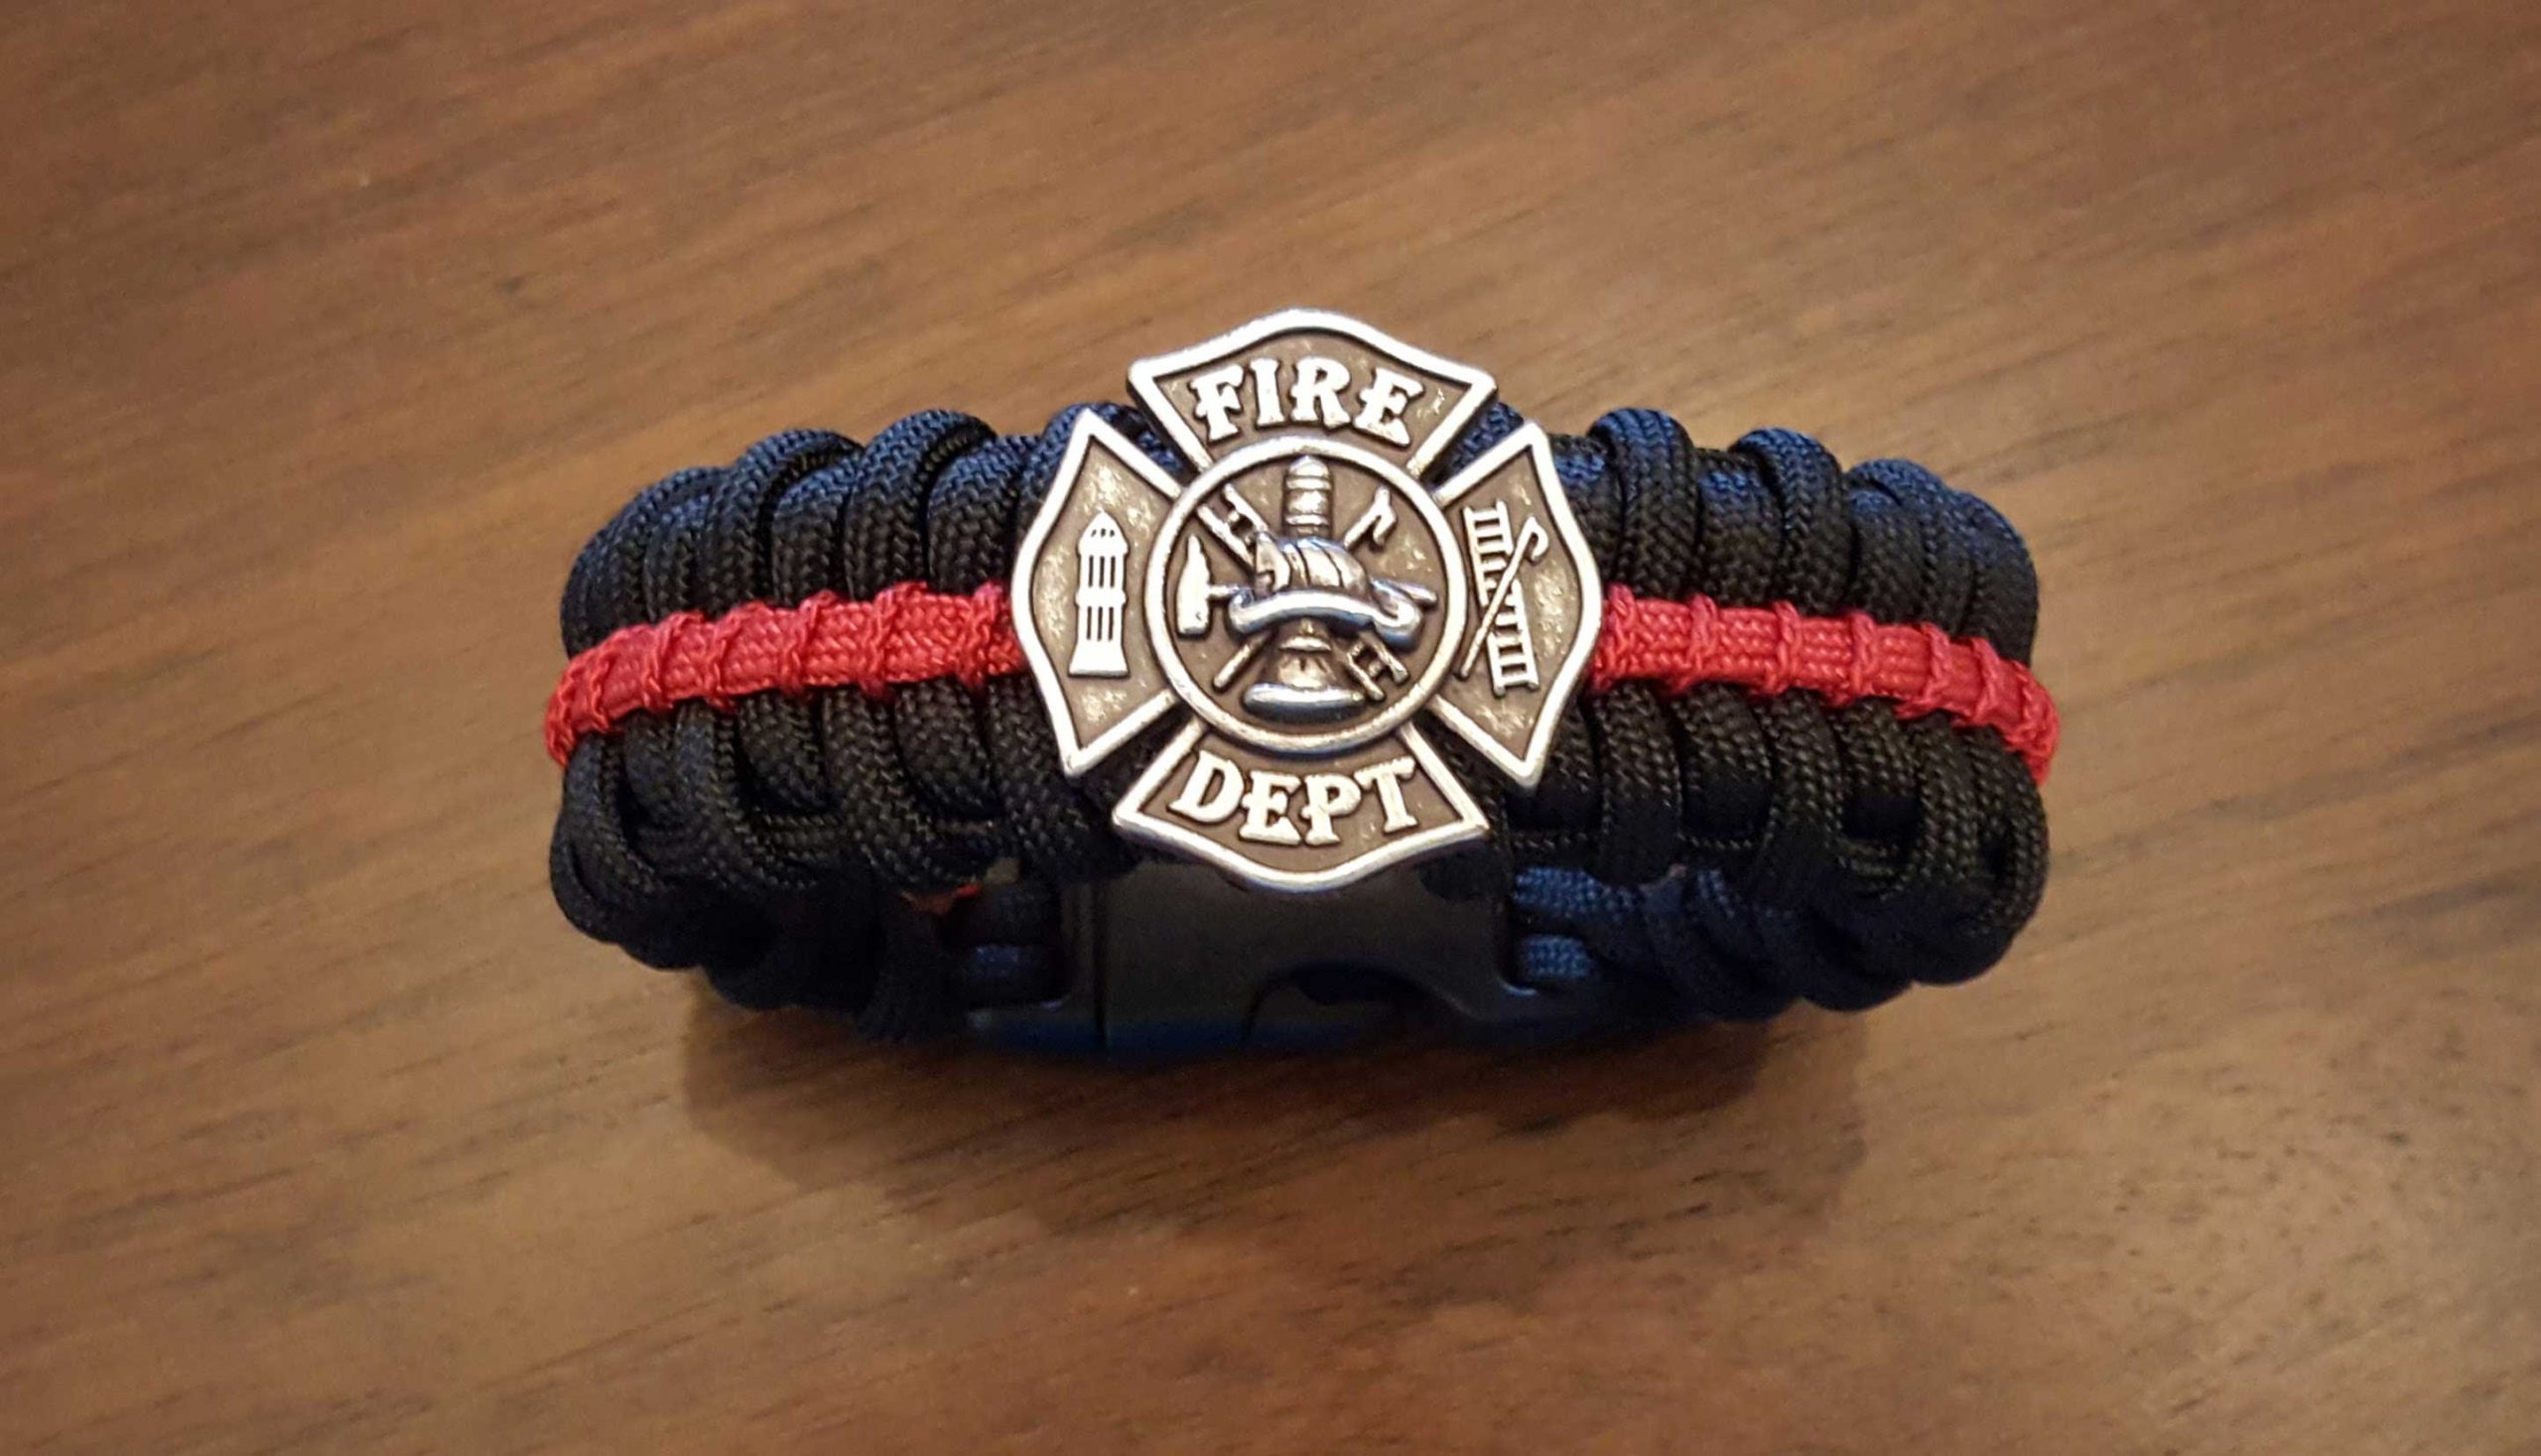 Exciting Gift Ideas for Your Firefighter Boyfriend